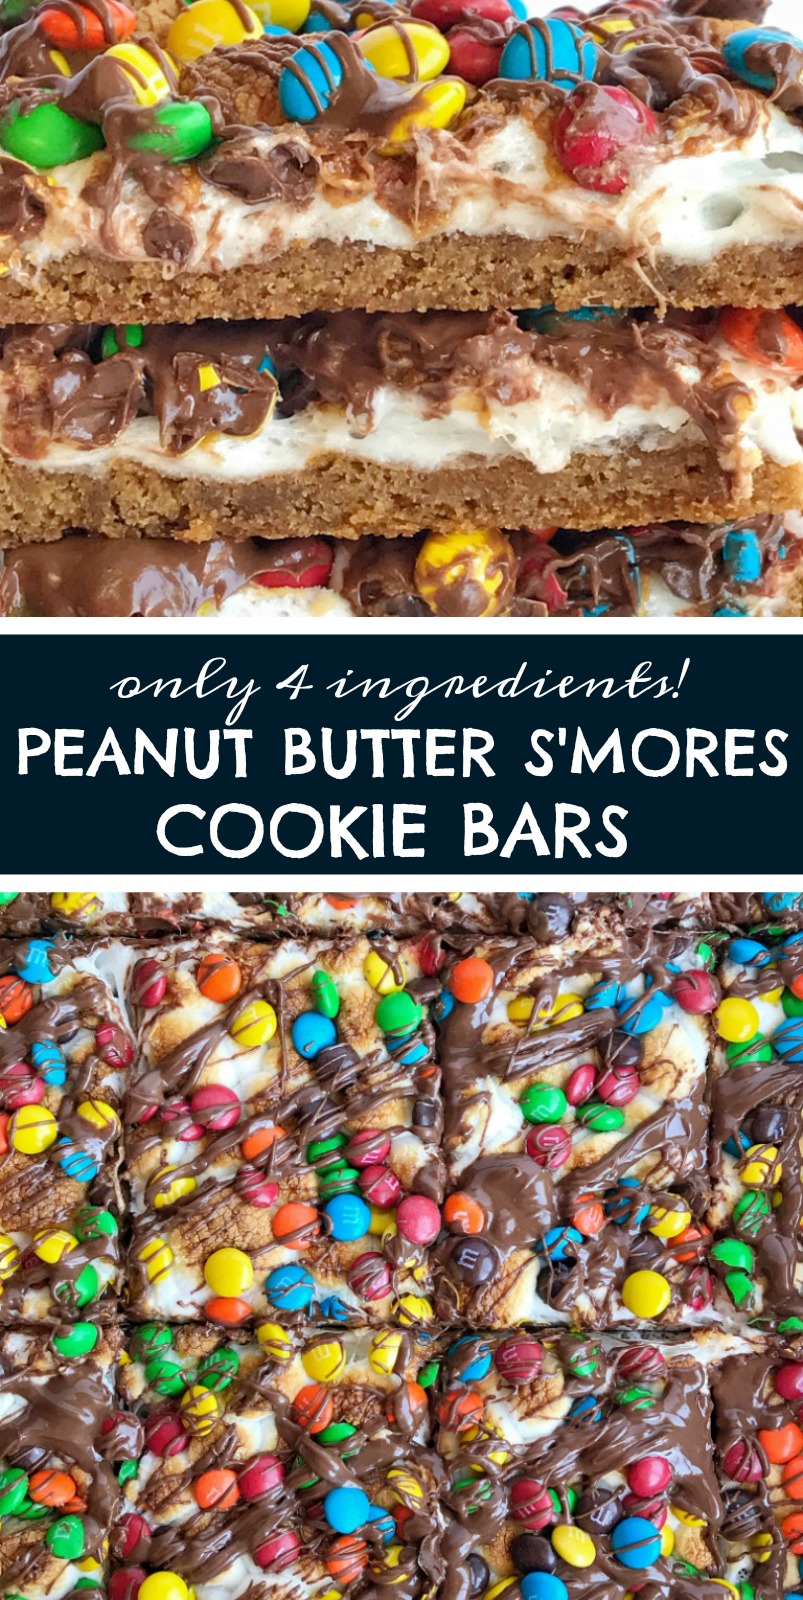 Peanut Butter Smores Cookie Bars | Smores Recipe | You only need 4 ingredients for deliciously gooey peanut butter smores cookies bars. Cookie dough, marshmallows, chocolate candies, and a chocolate drizzle! #smoresrecipes #easydessertrecipe #cookiebars #recipeoftheday #dessertideas #smores